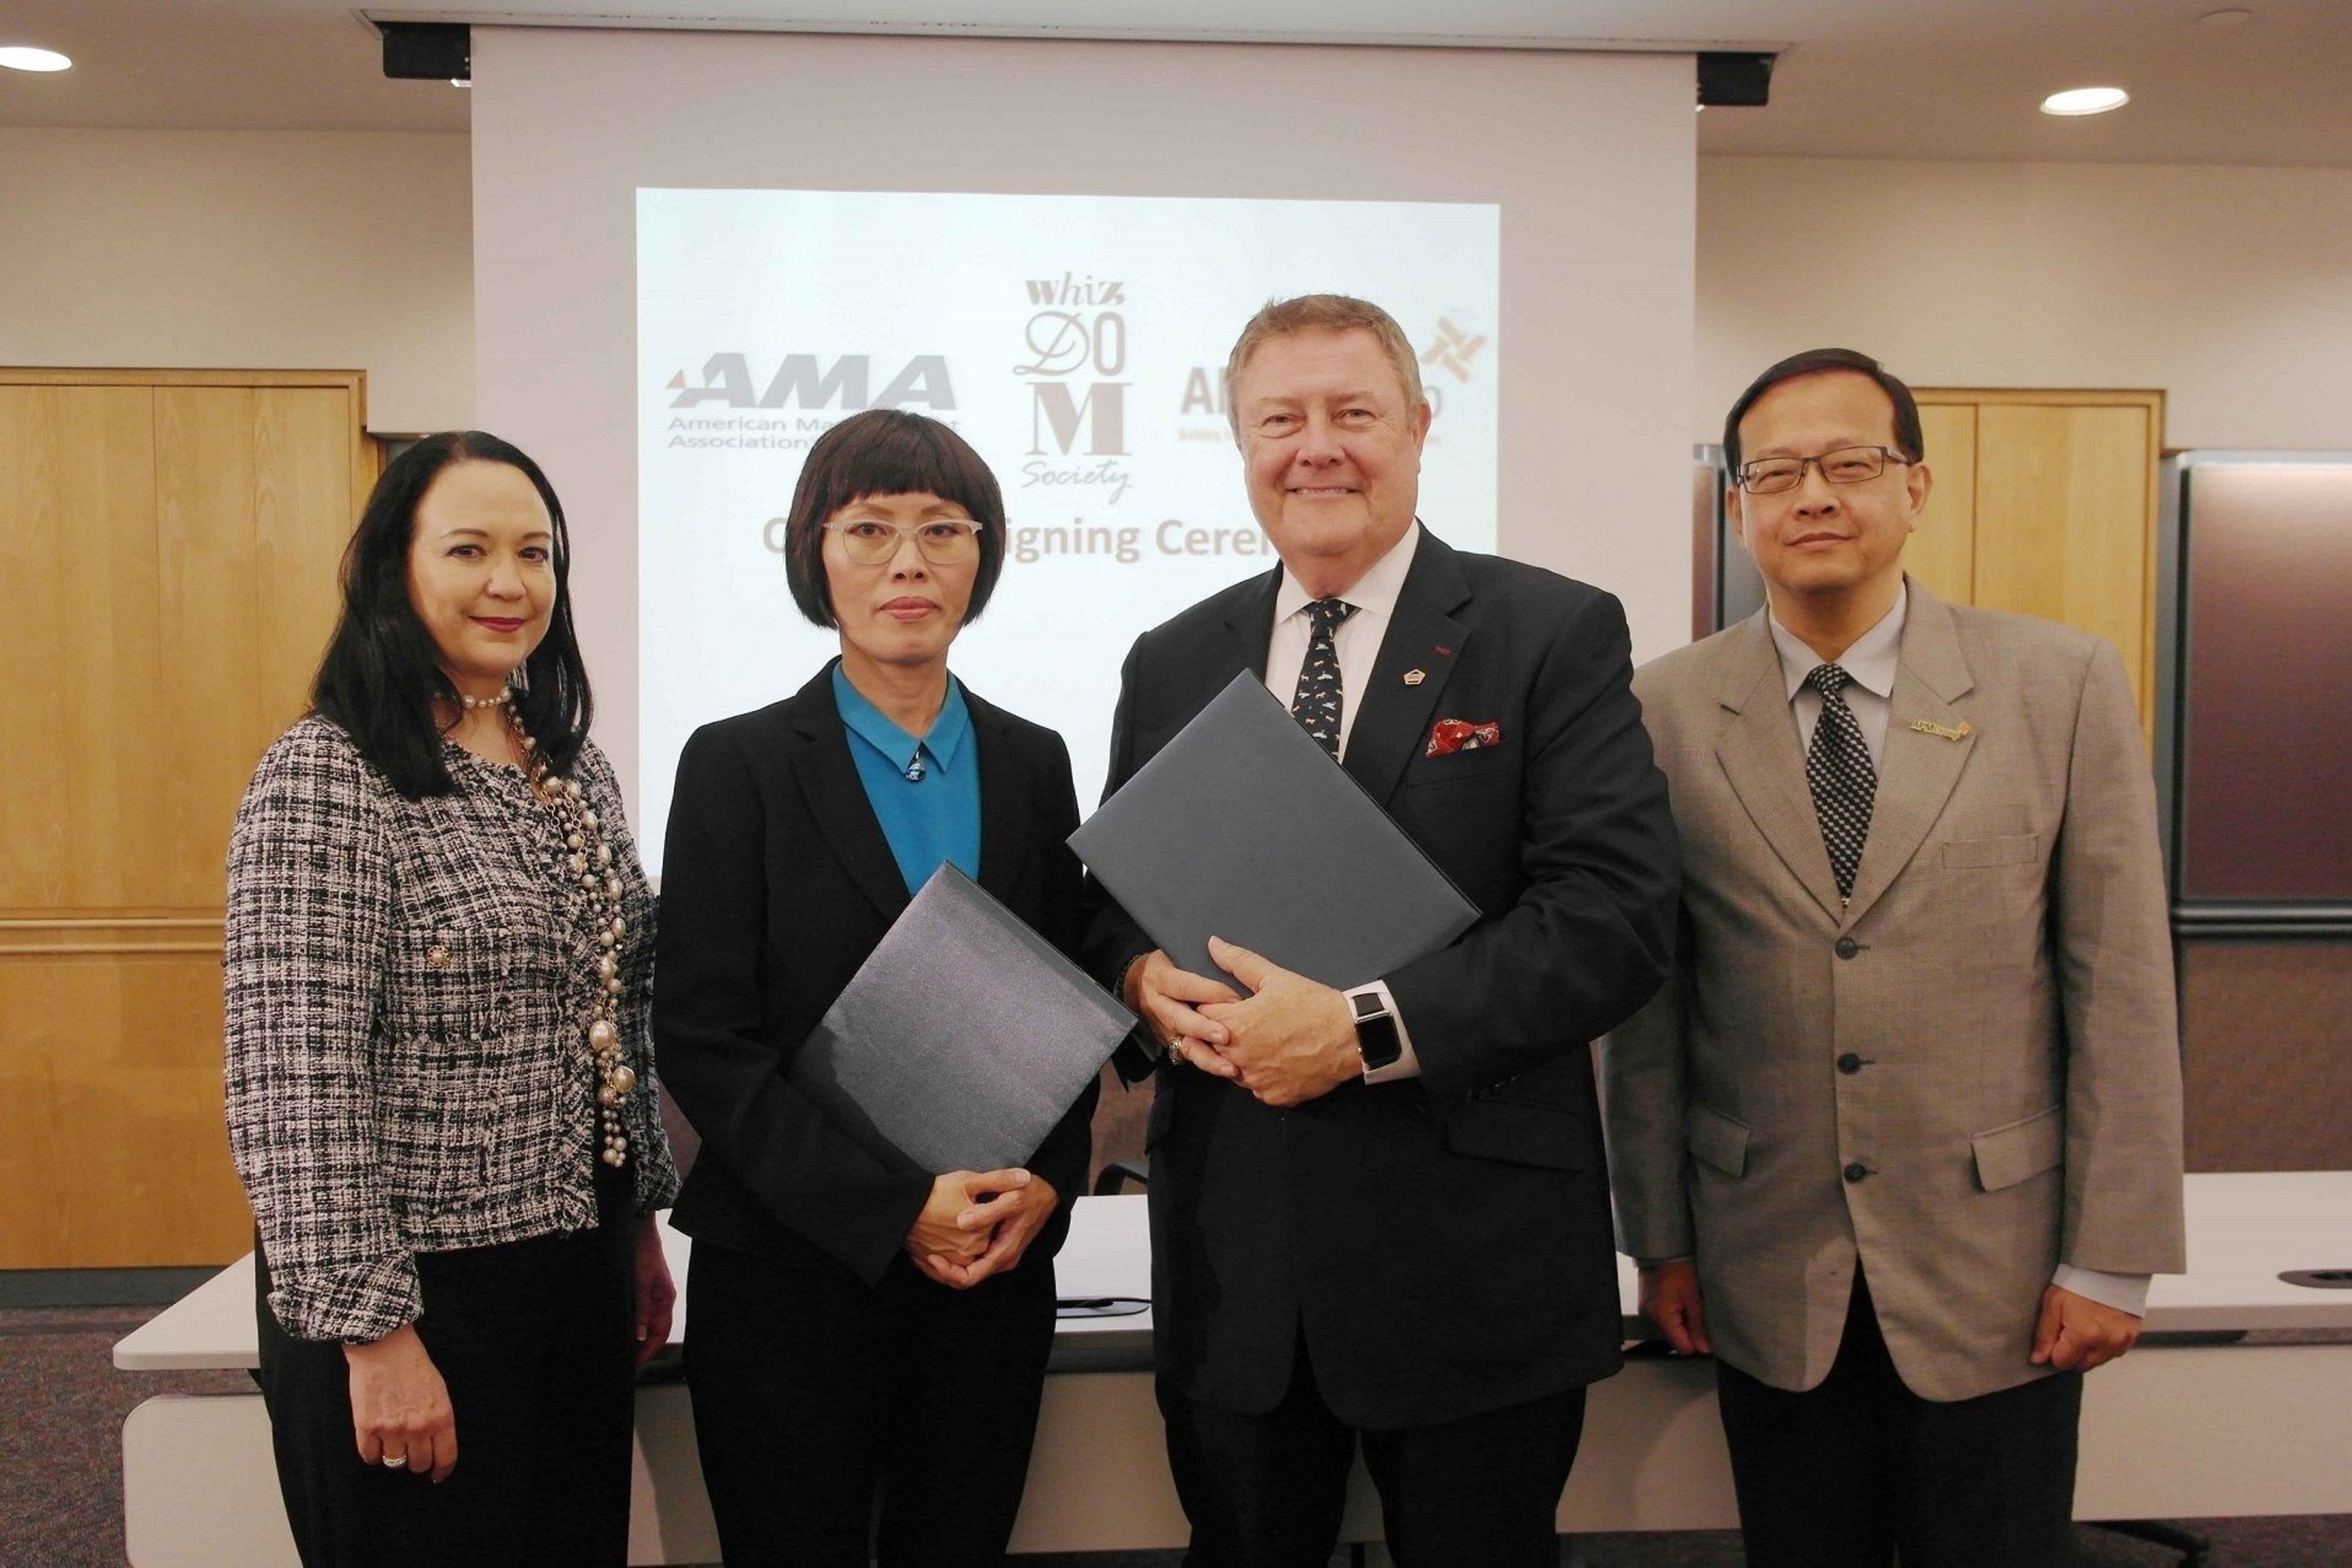 Mrs. Wilai Somdungjate-Ottevaere (2nd from left), Chief Marketing Officer of MQDC and Mr. Edward T. Reilly (3rd from left), President and CEO of AMA (American Management Association) signed agreement to provide self-development programmes offer for residents of MQDC’s Whizdom-branded condominiums as well as Whizdom Society members at AMA’s office New York, U.S.A.